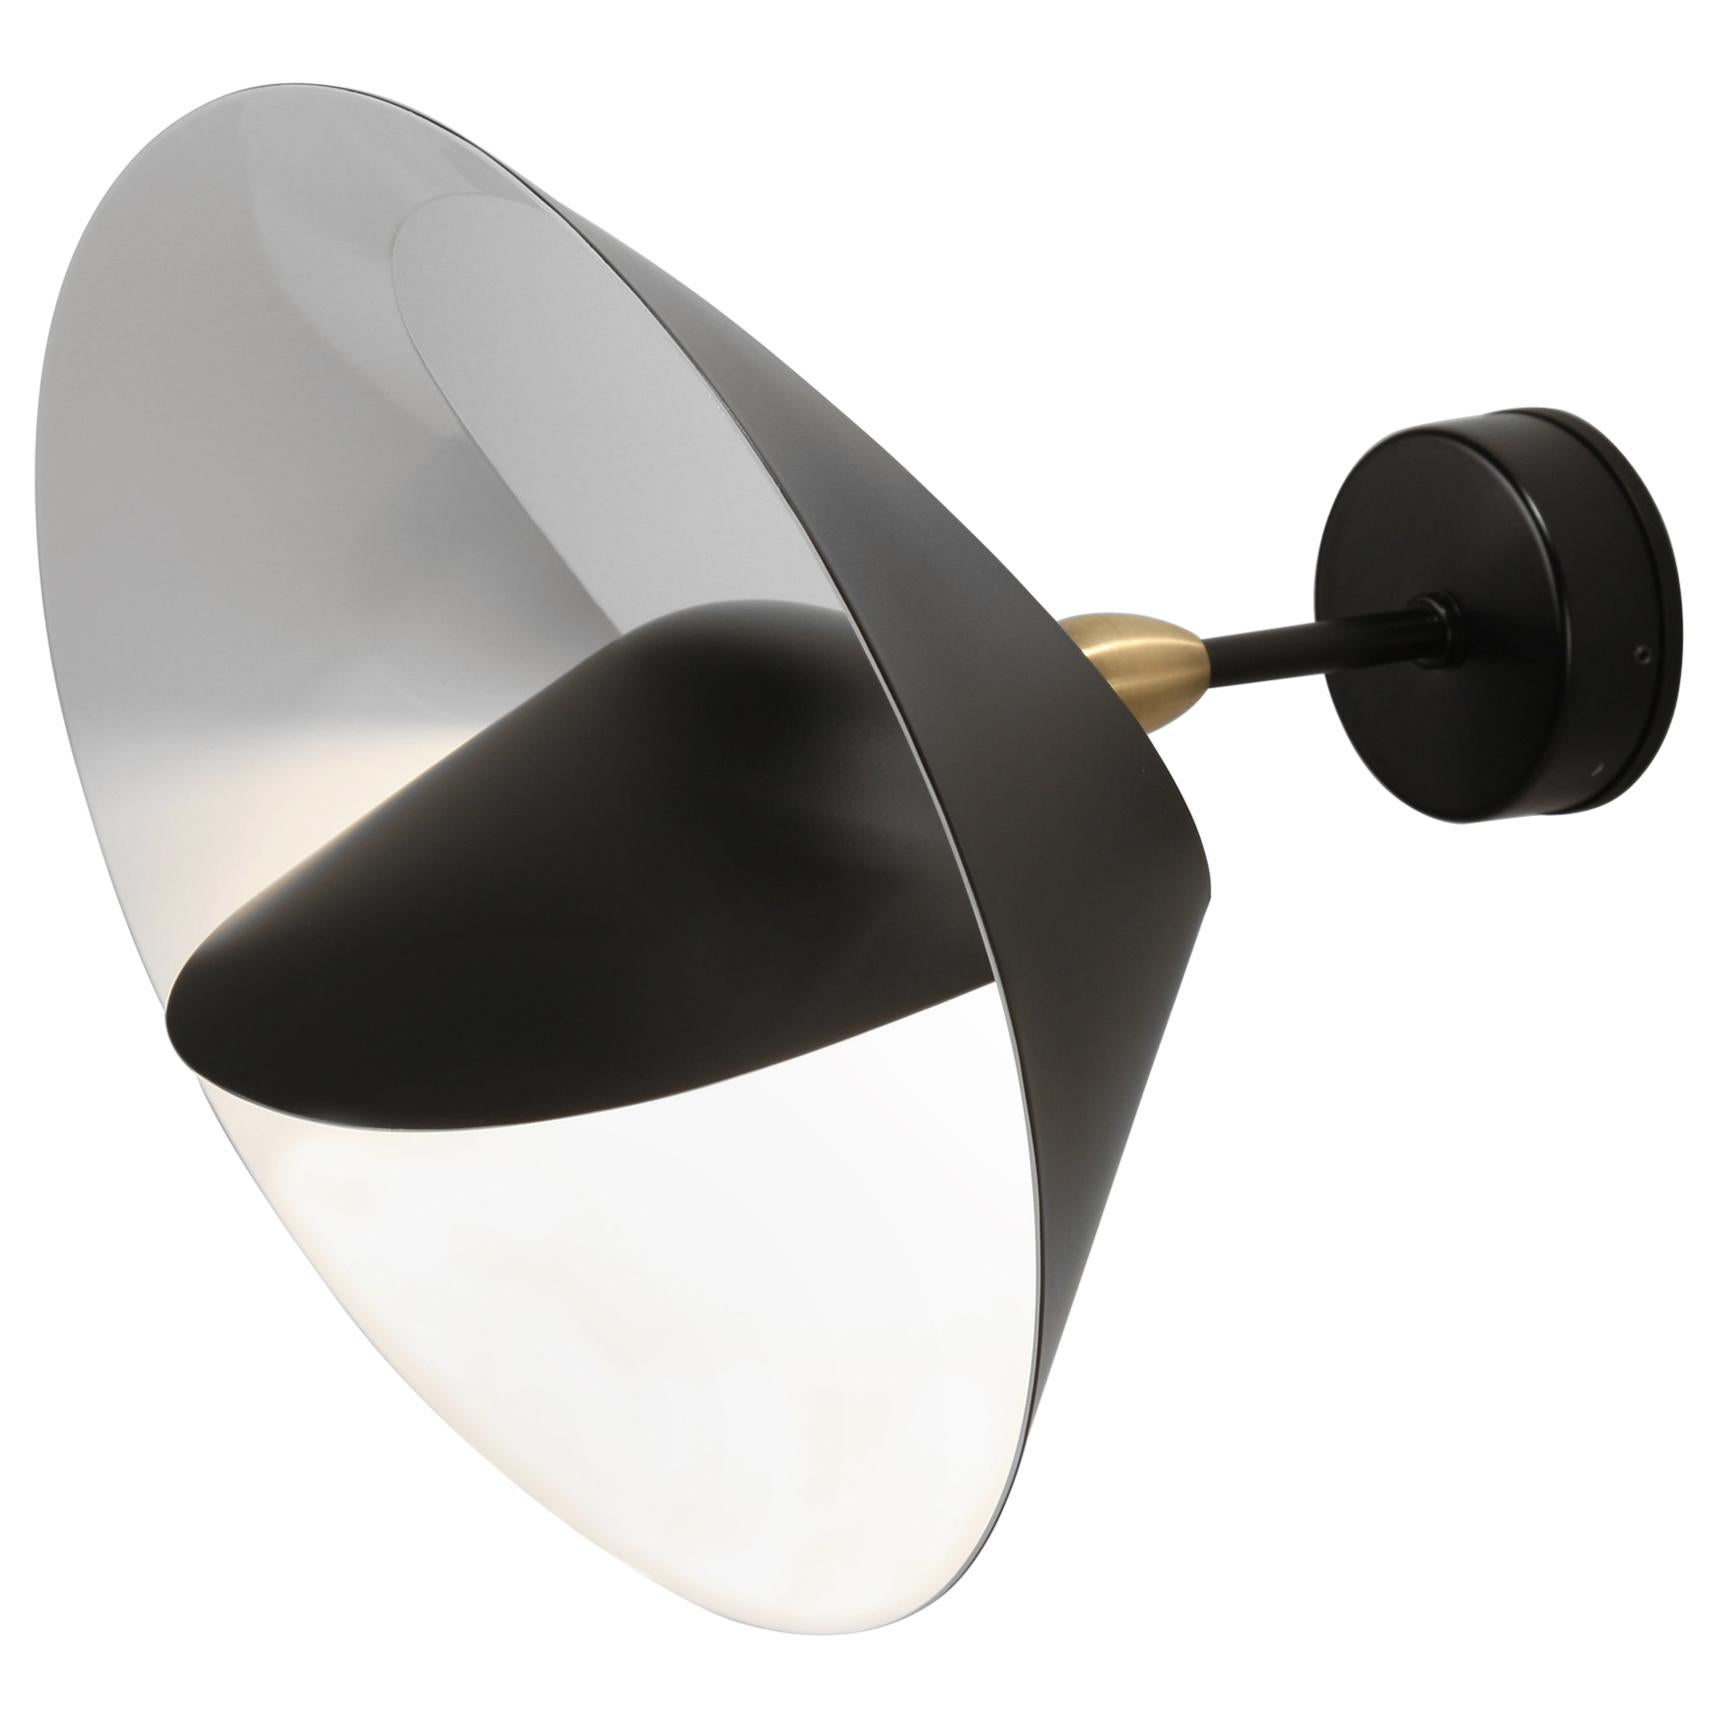 Serge Mouille Mid-Century Modern Black Saturn Wall Lamp For Sale